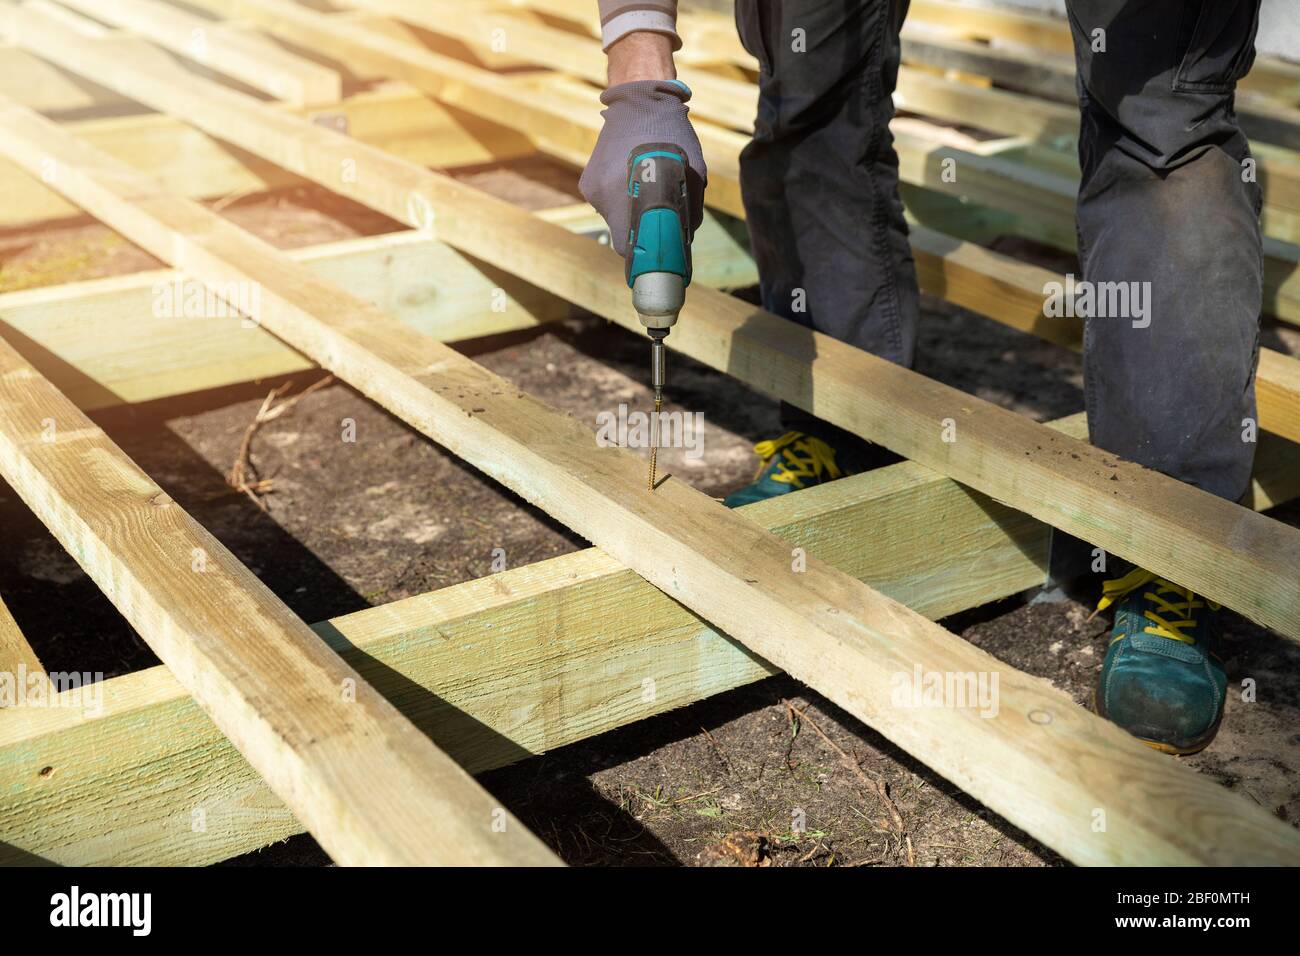 man building wooden frame for patio deck Stock Photo